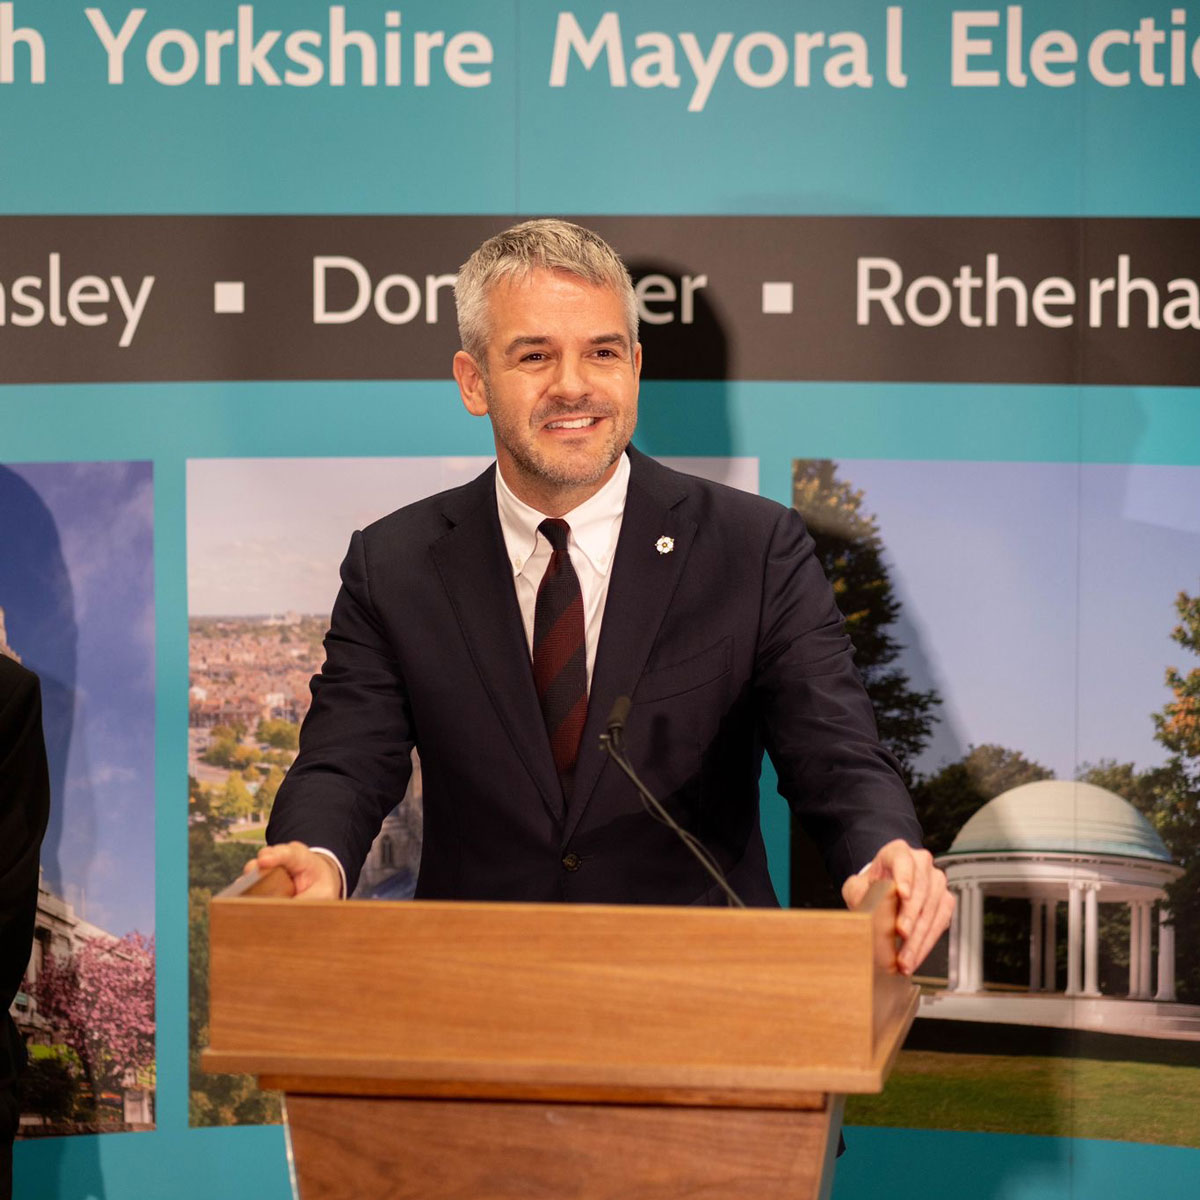 Oliver Coppard has been elected as the Mayor of South Yorkshire. See full results here: orlo.uk/4orVB